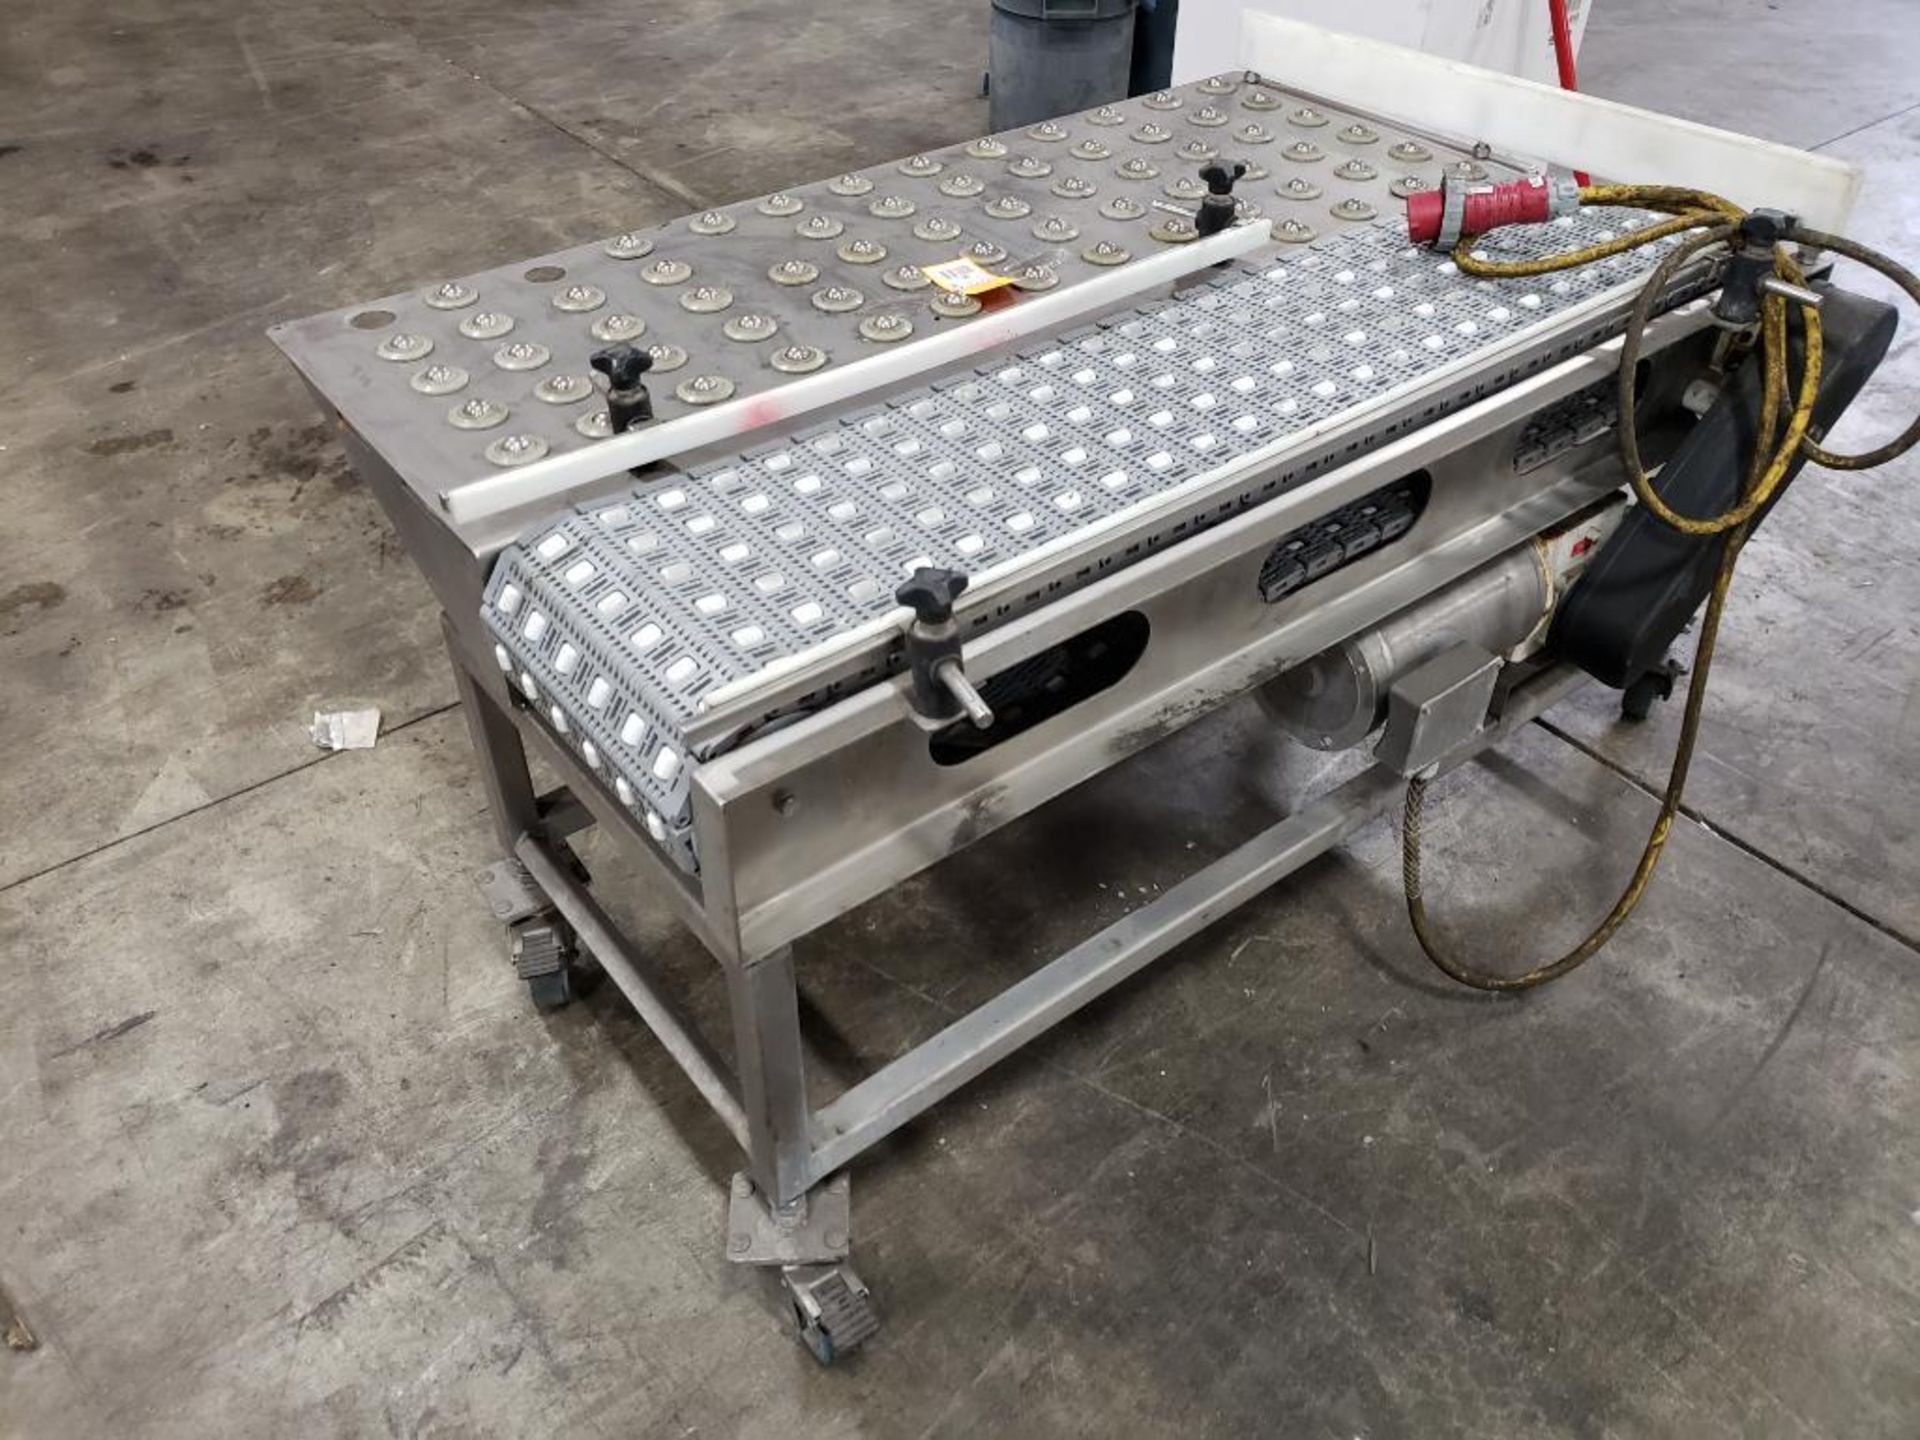 Food grade washdown power conveyor on casters with roller side table. Overall size 53" long x 32" w - Image 7 of 7